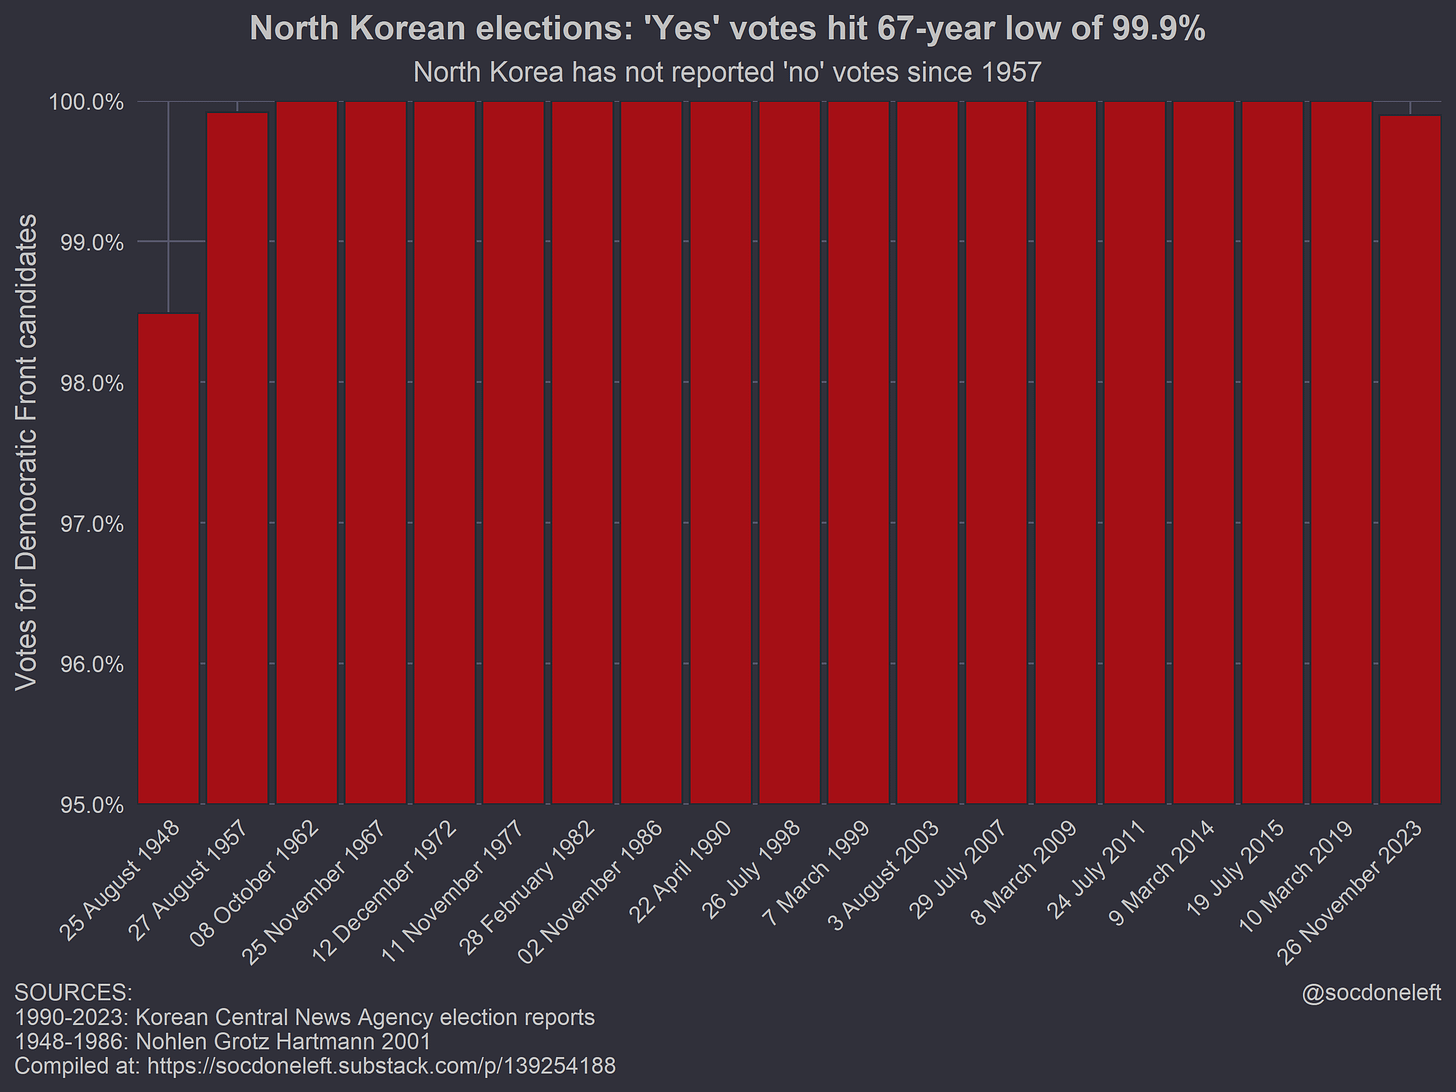 At this rate, Kim’s coalition could lose majority support by the 2522 local elections!